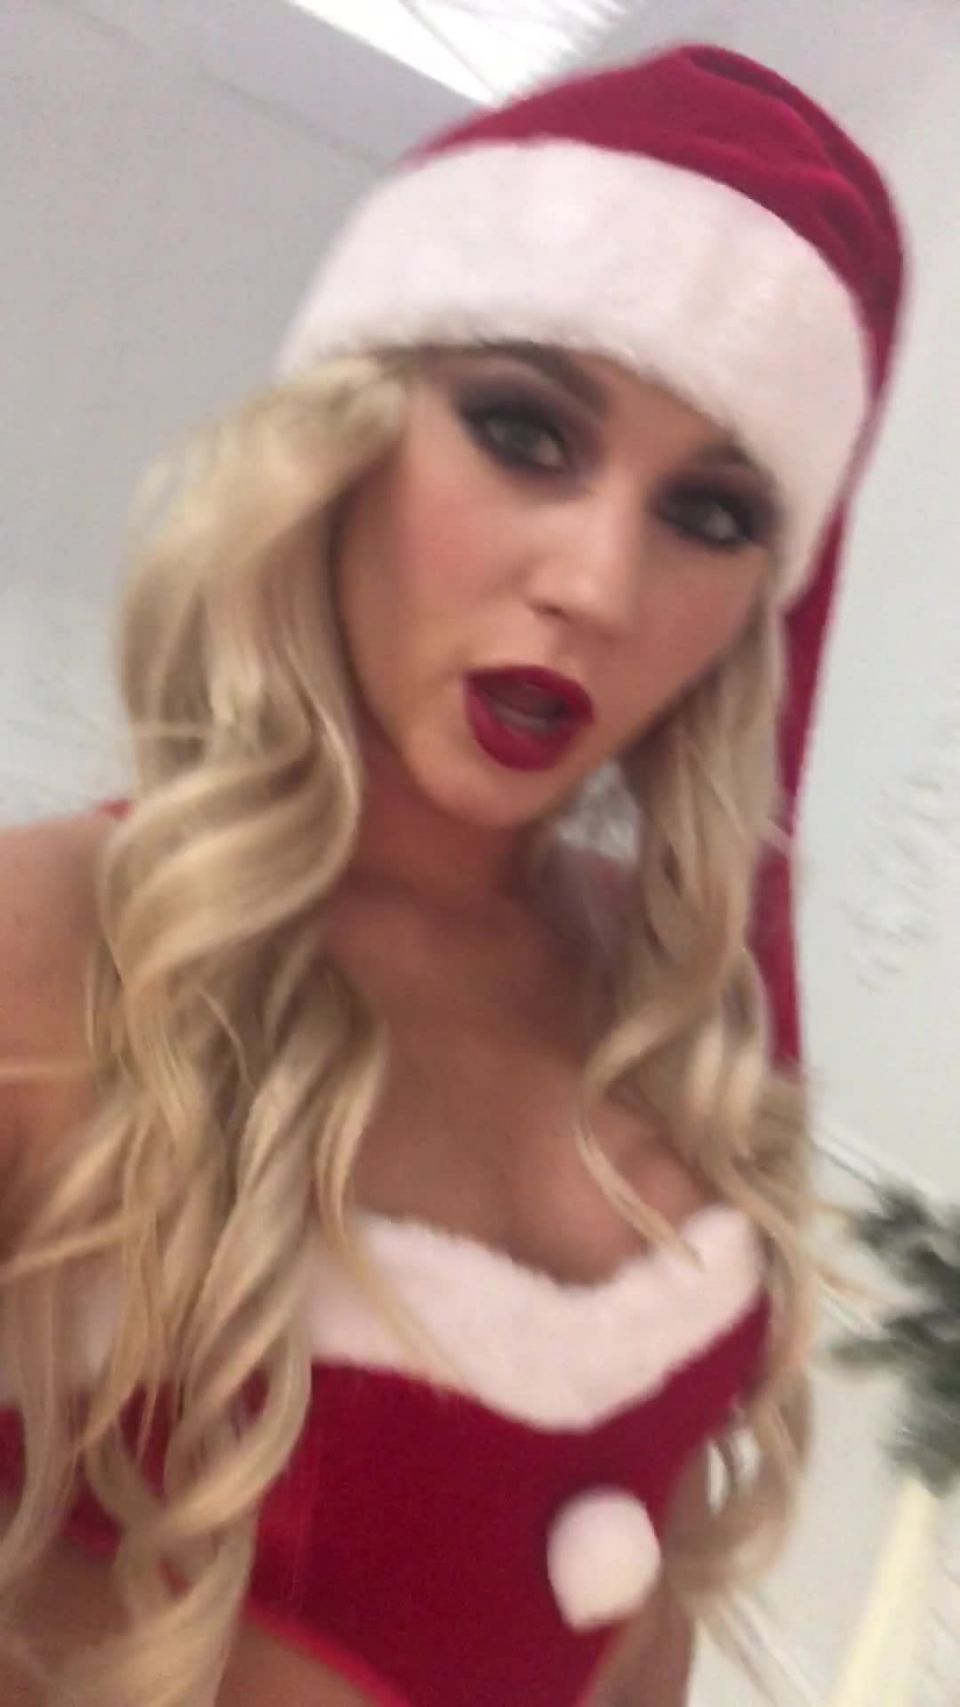 Onlyfans - Jessyerinn - Holiday sets are coming - 03-12-2018